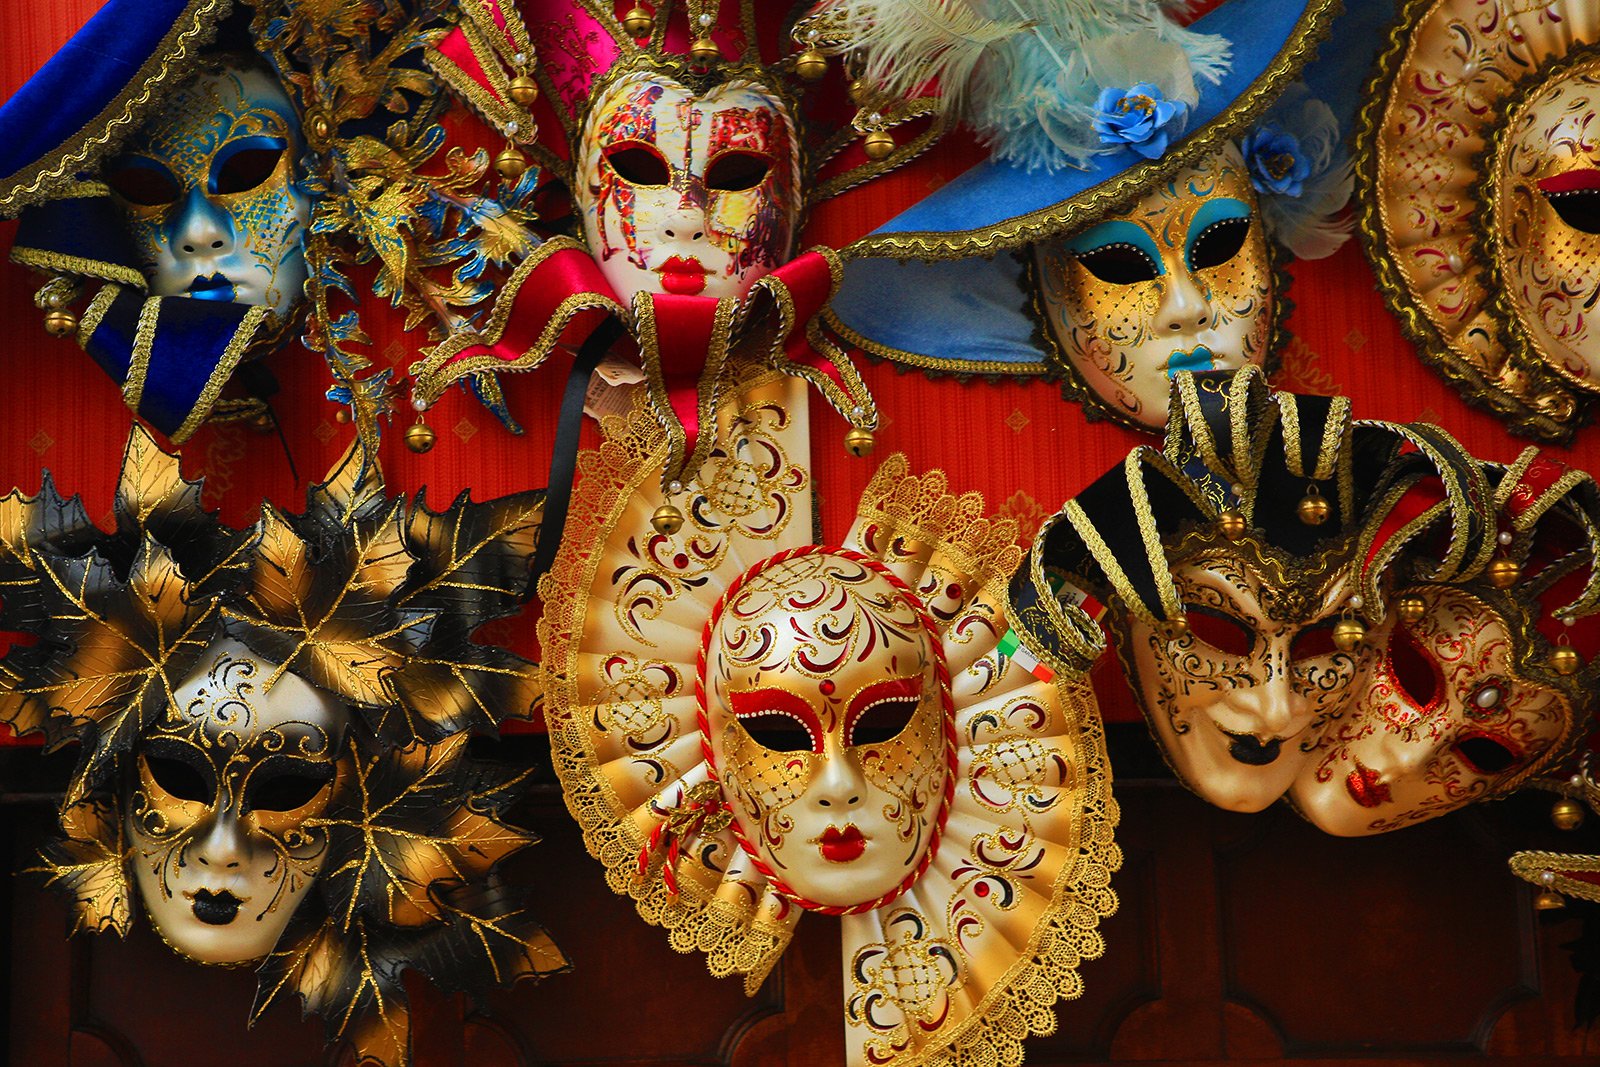 How to buy a Venetian mask in Venice